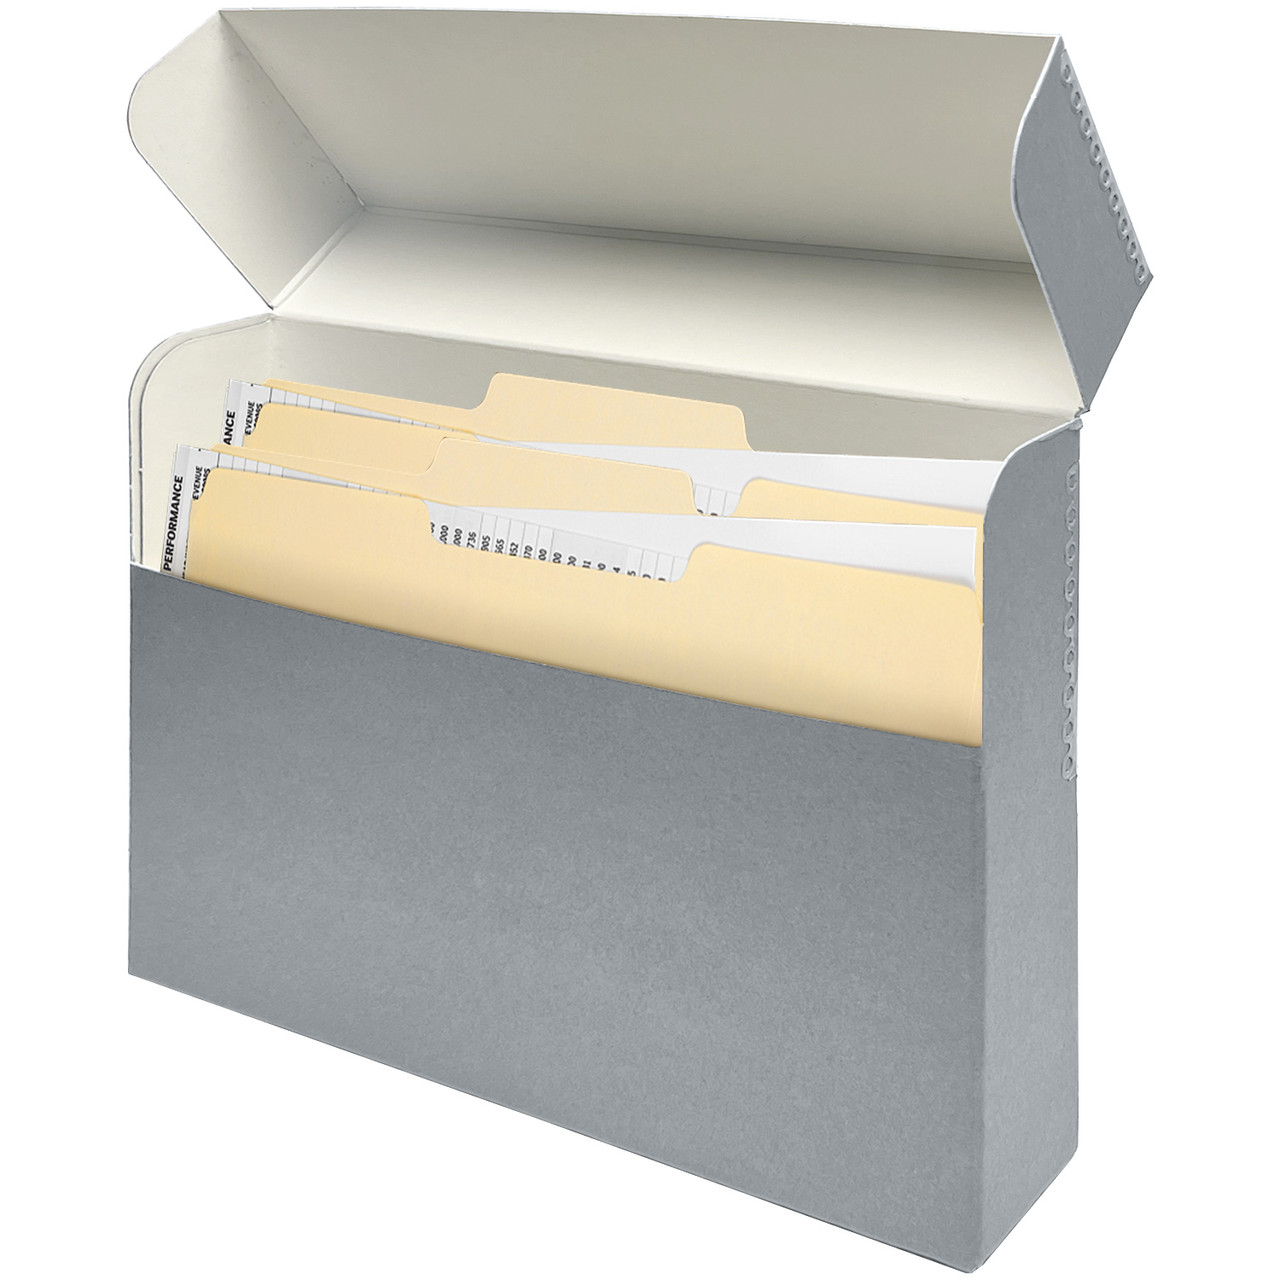 Lineco Legal 15.5 x 10.5 x 2.5 wide Blue/Gray Archival Document